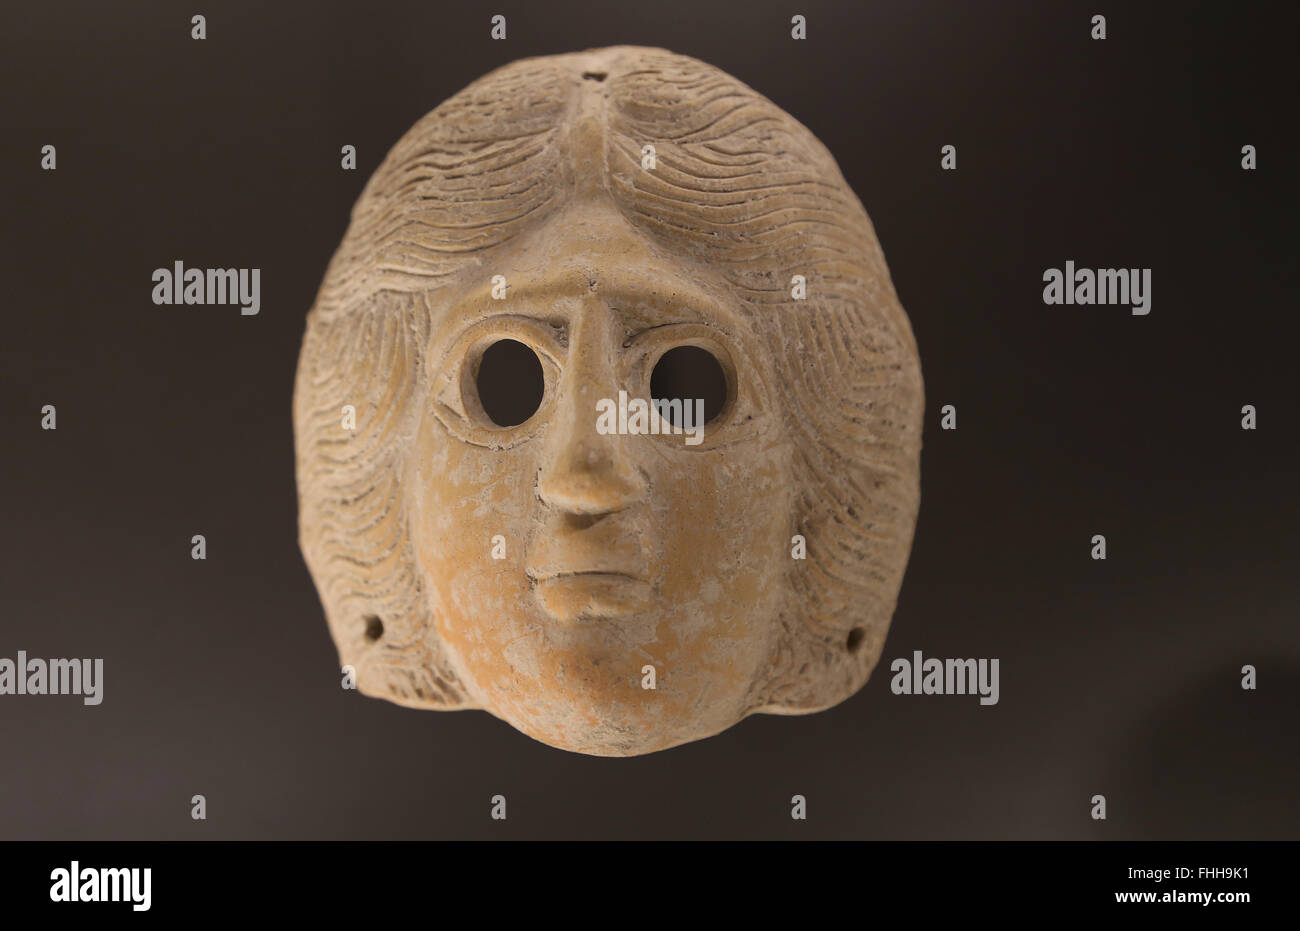 Funerary practices. Eastern provinces of Roman Empire. Near Eastern. Terracotta mask. Levantine tombs. Imperial period. Stock Photo